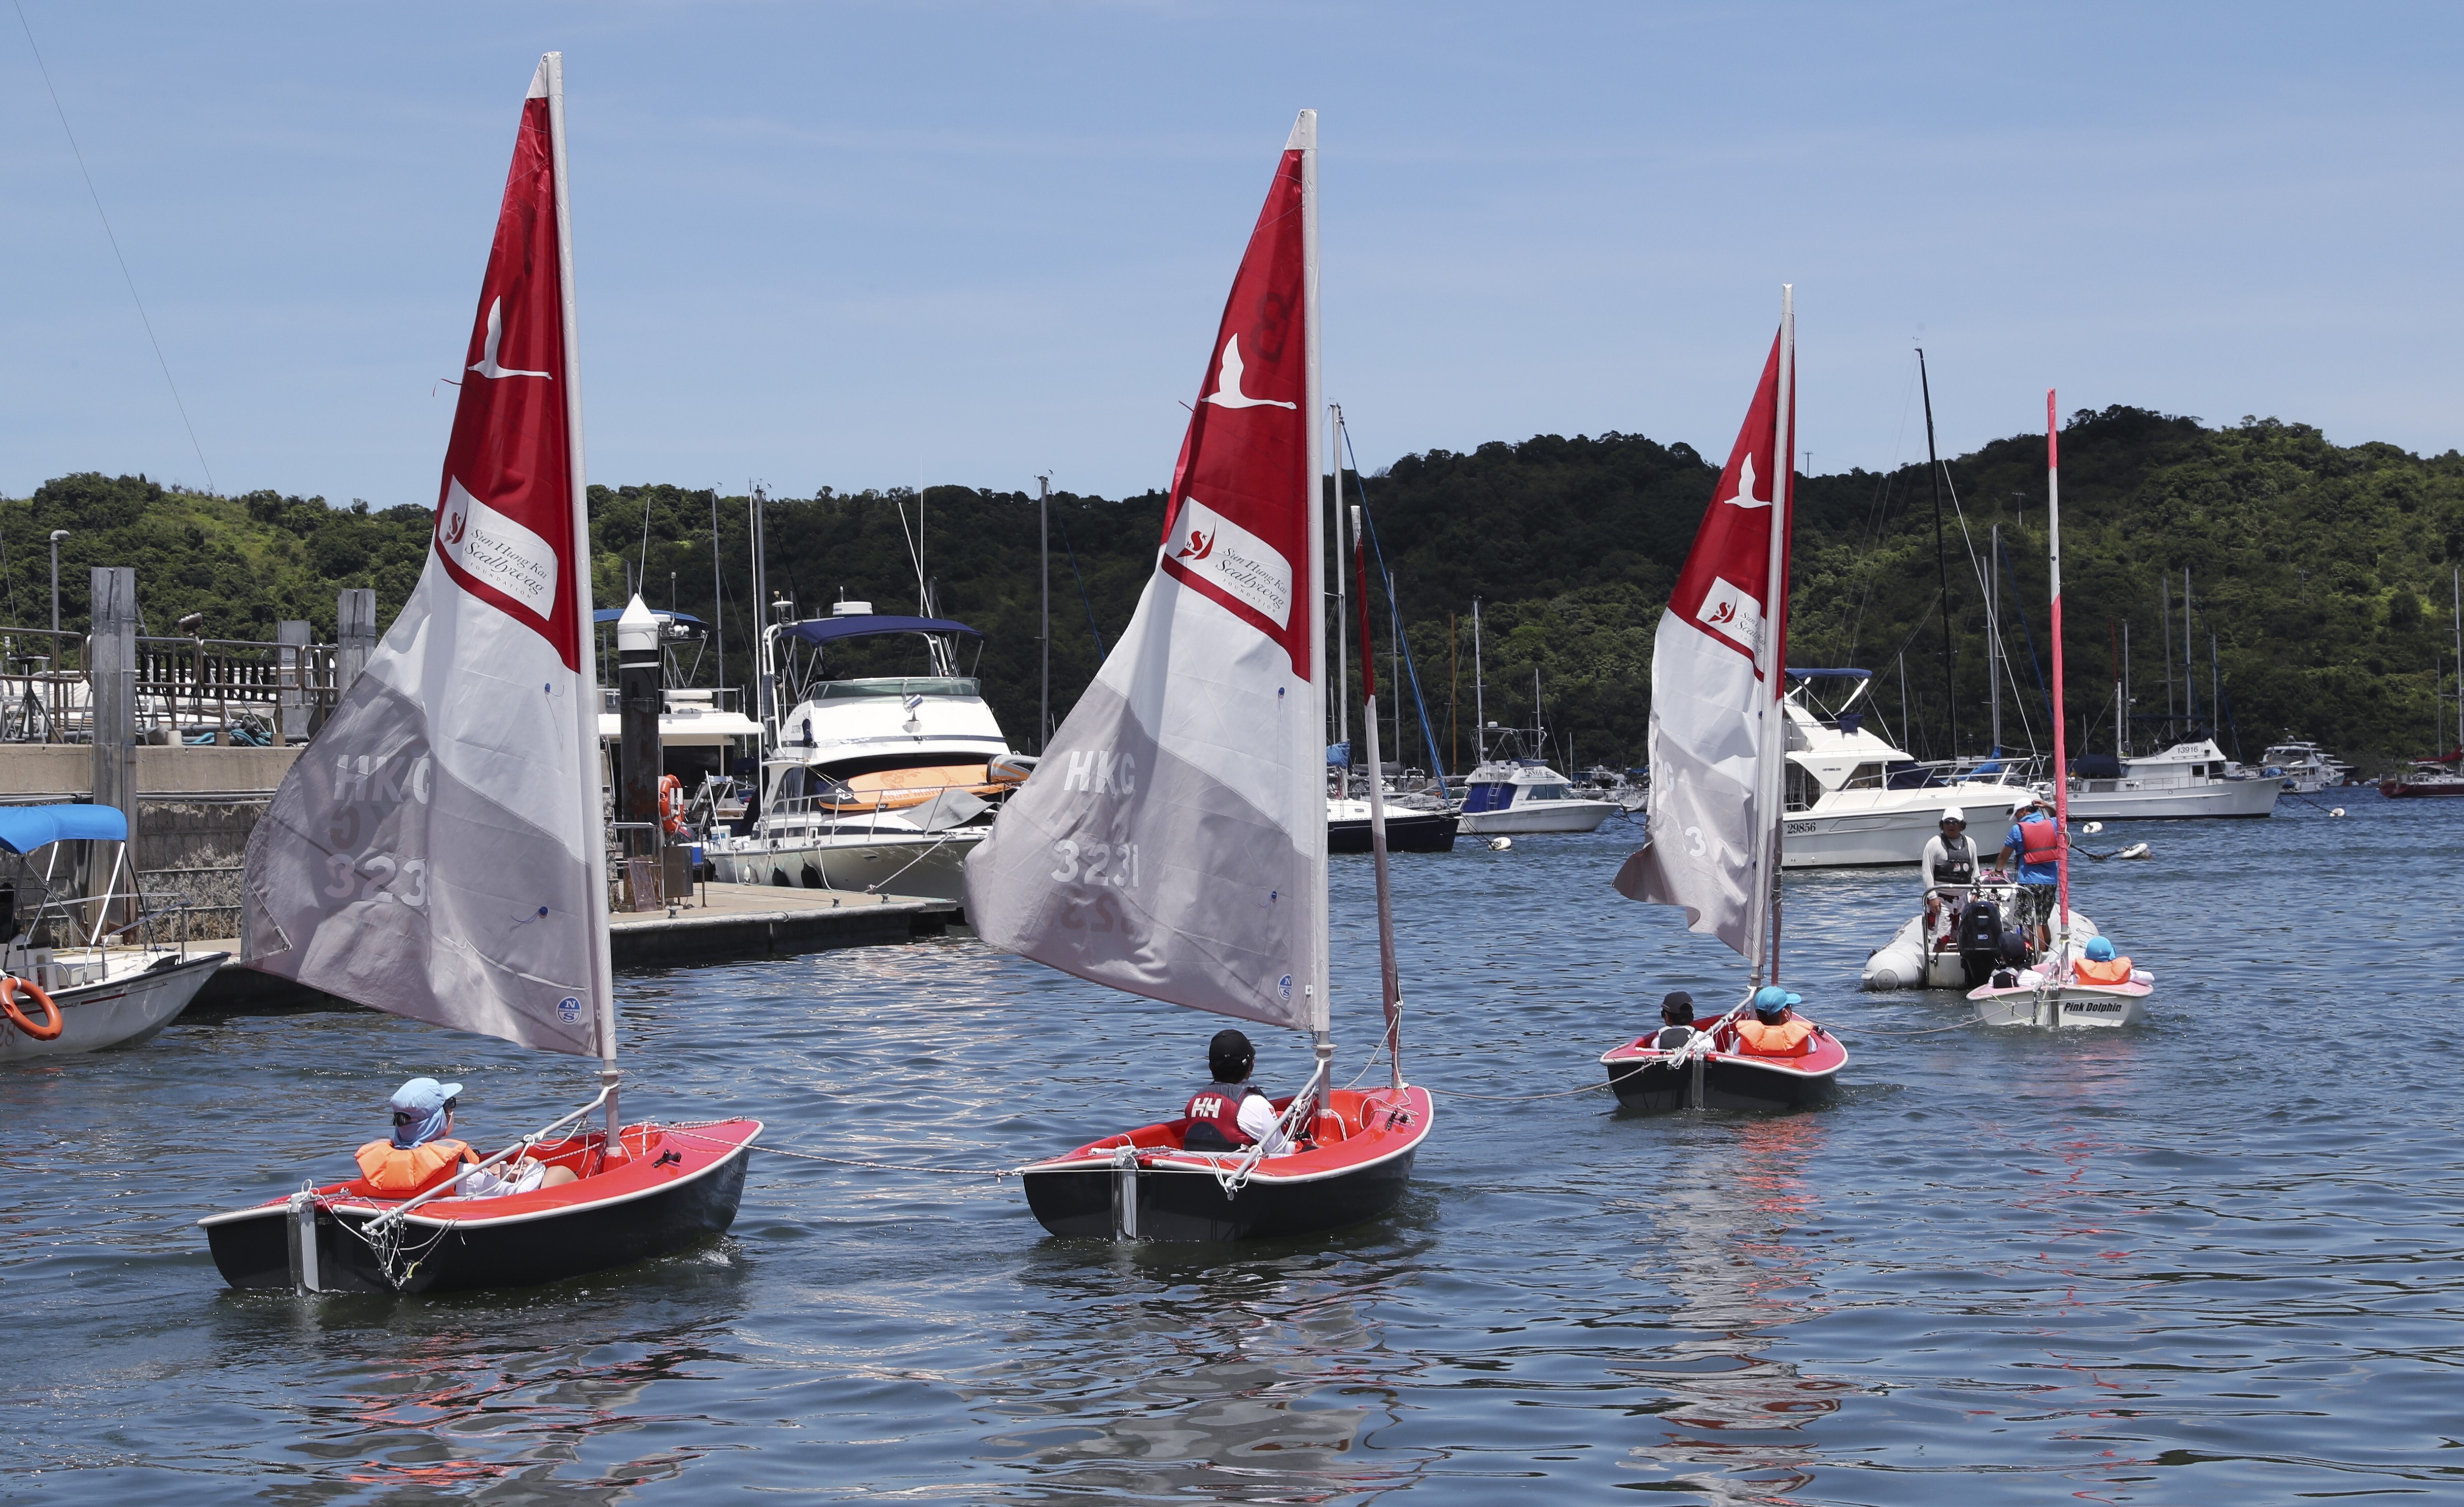 Kids head out to the water in their dinghies as part of the Sailability and Sun Hung Kai/Scallywag partnership. Photo: Edmond So